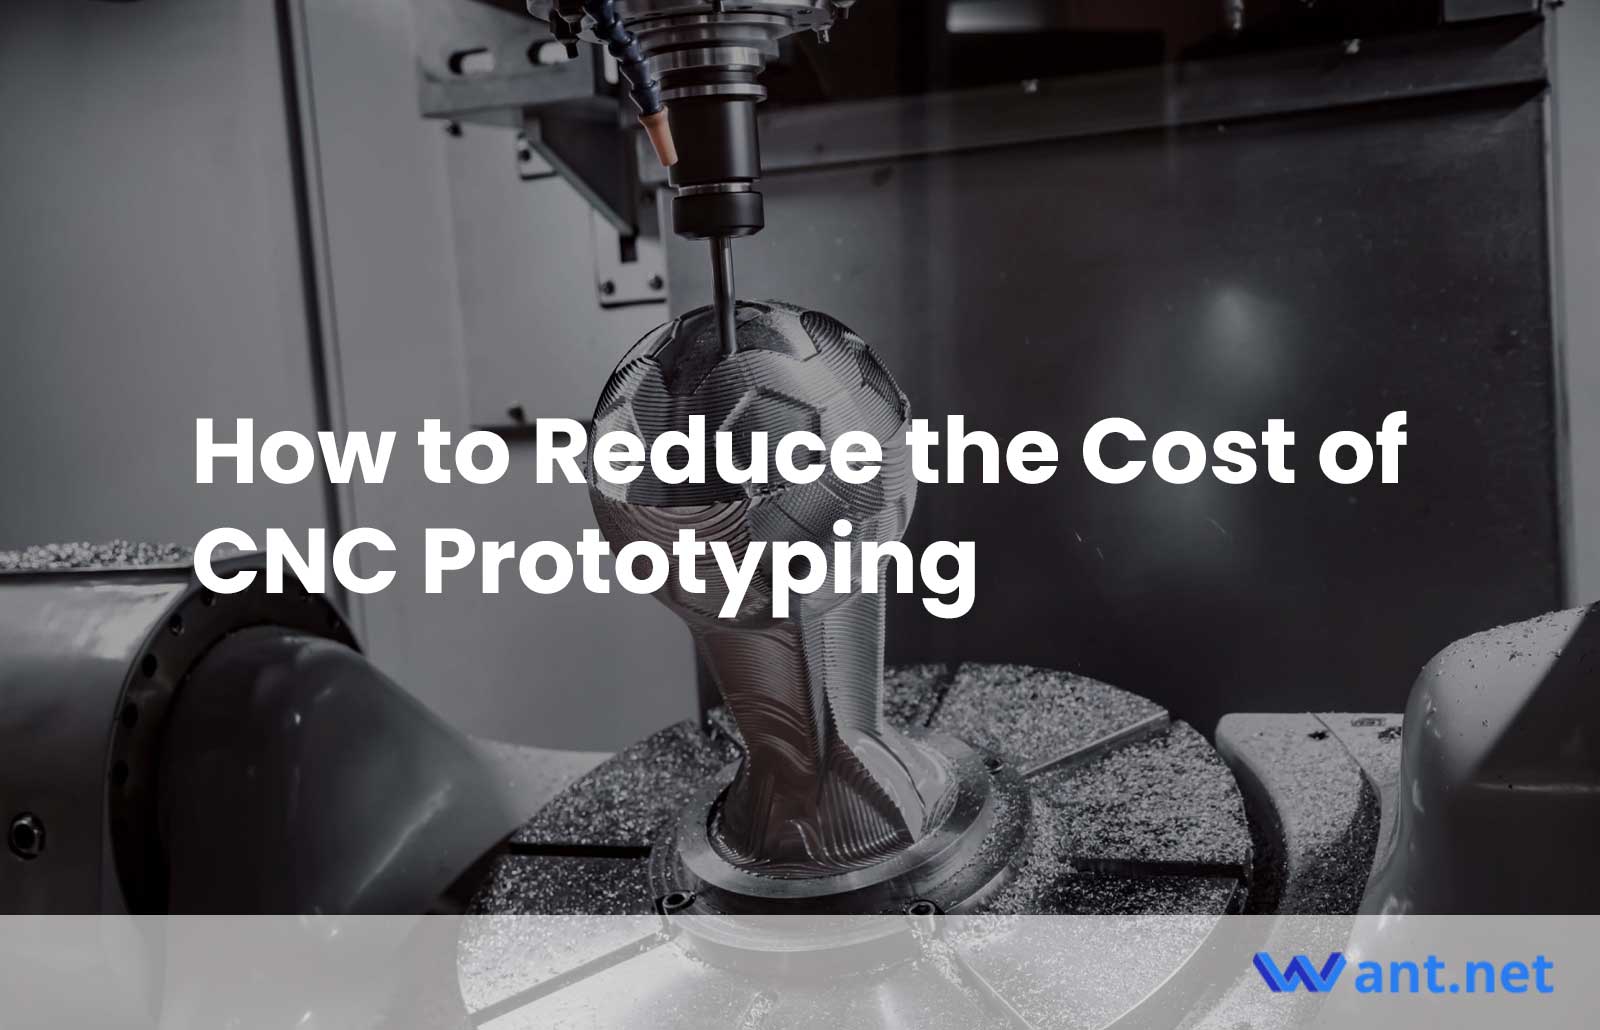 How to Reduce the Cost of CNC Prototyping